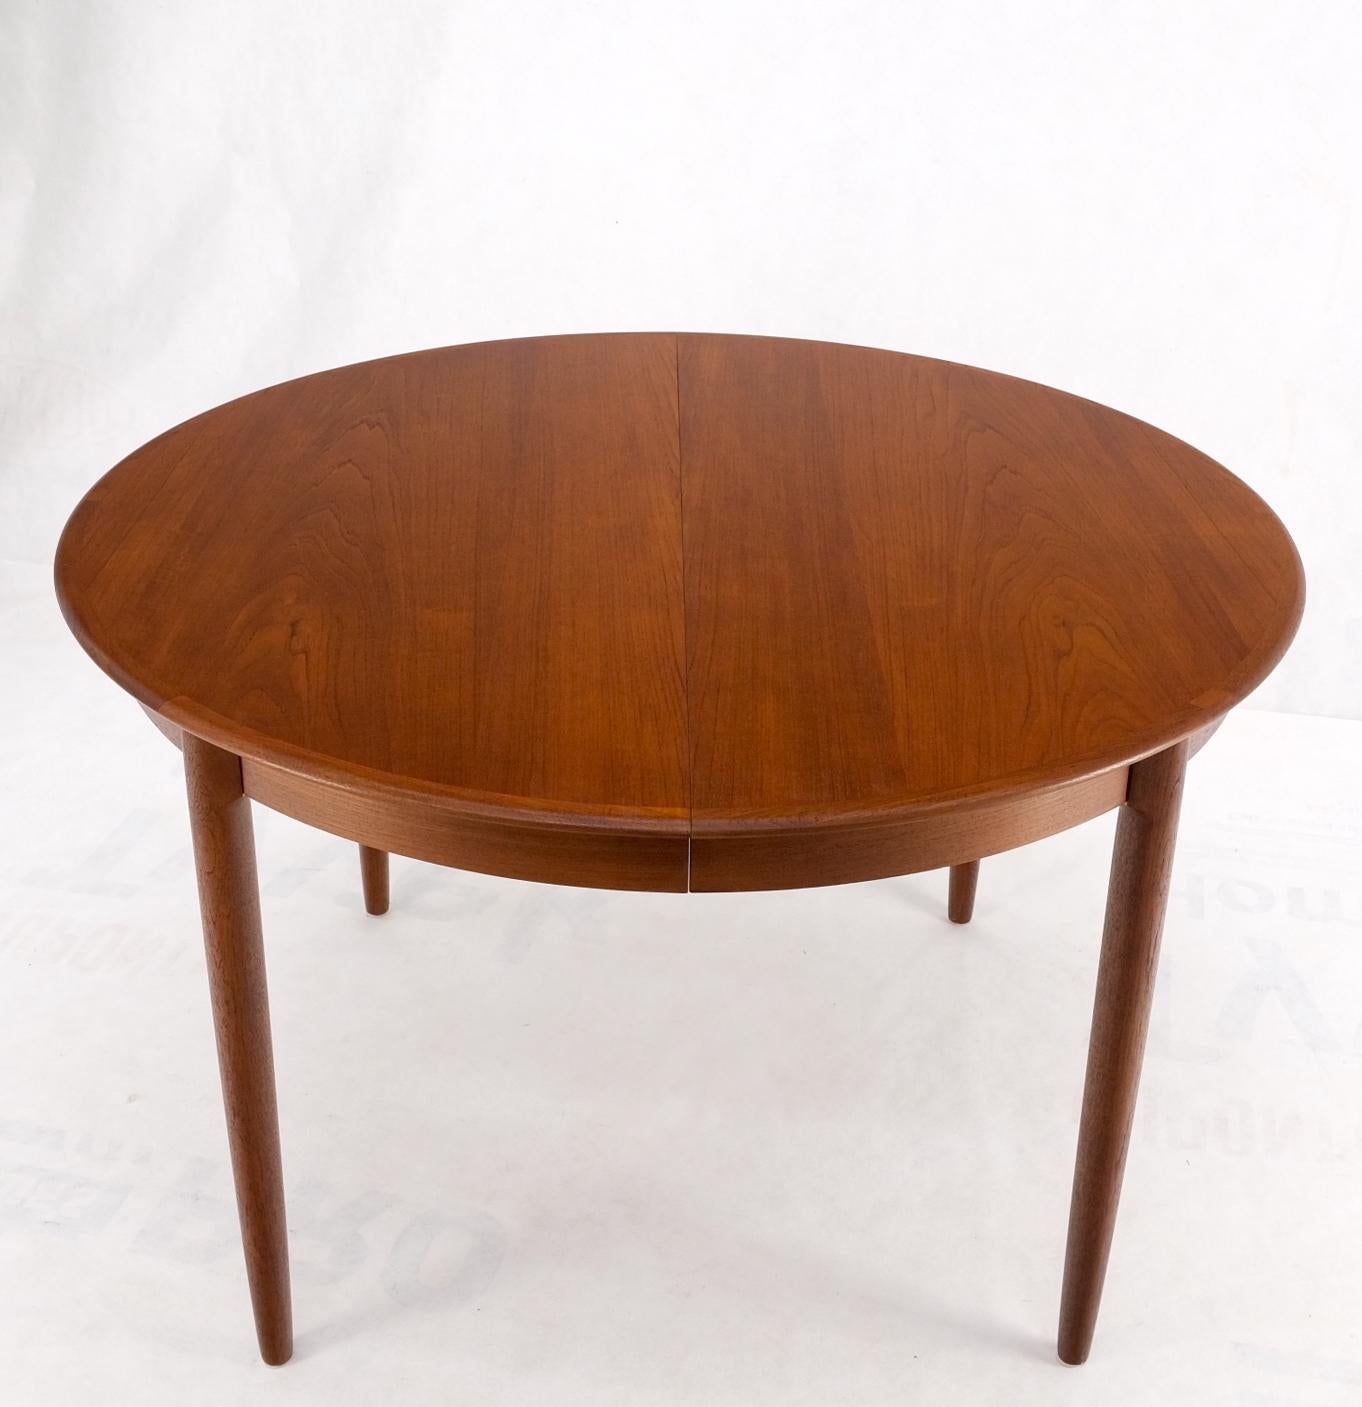 Danish Teak Mid-Century Modern Round Dining Table w/ Two Extension Boards Leafs For Sale 4